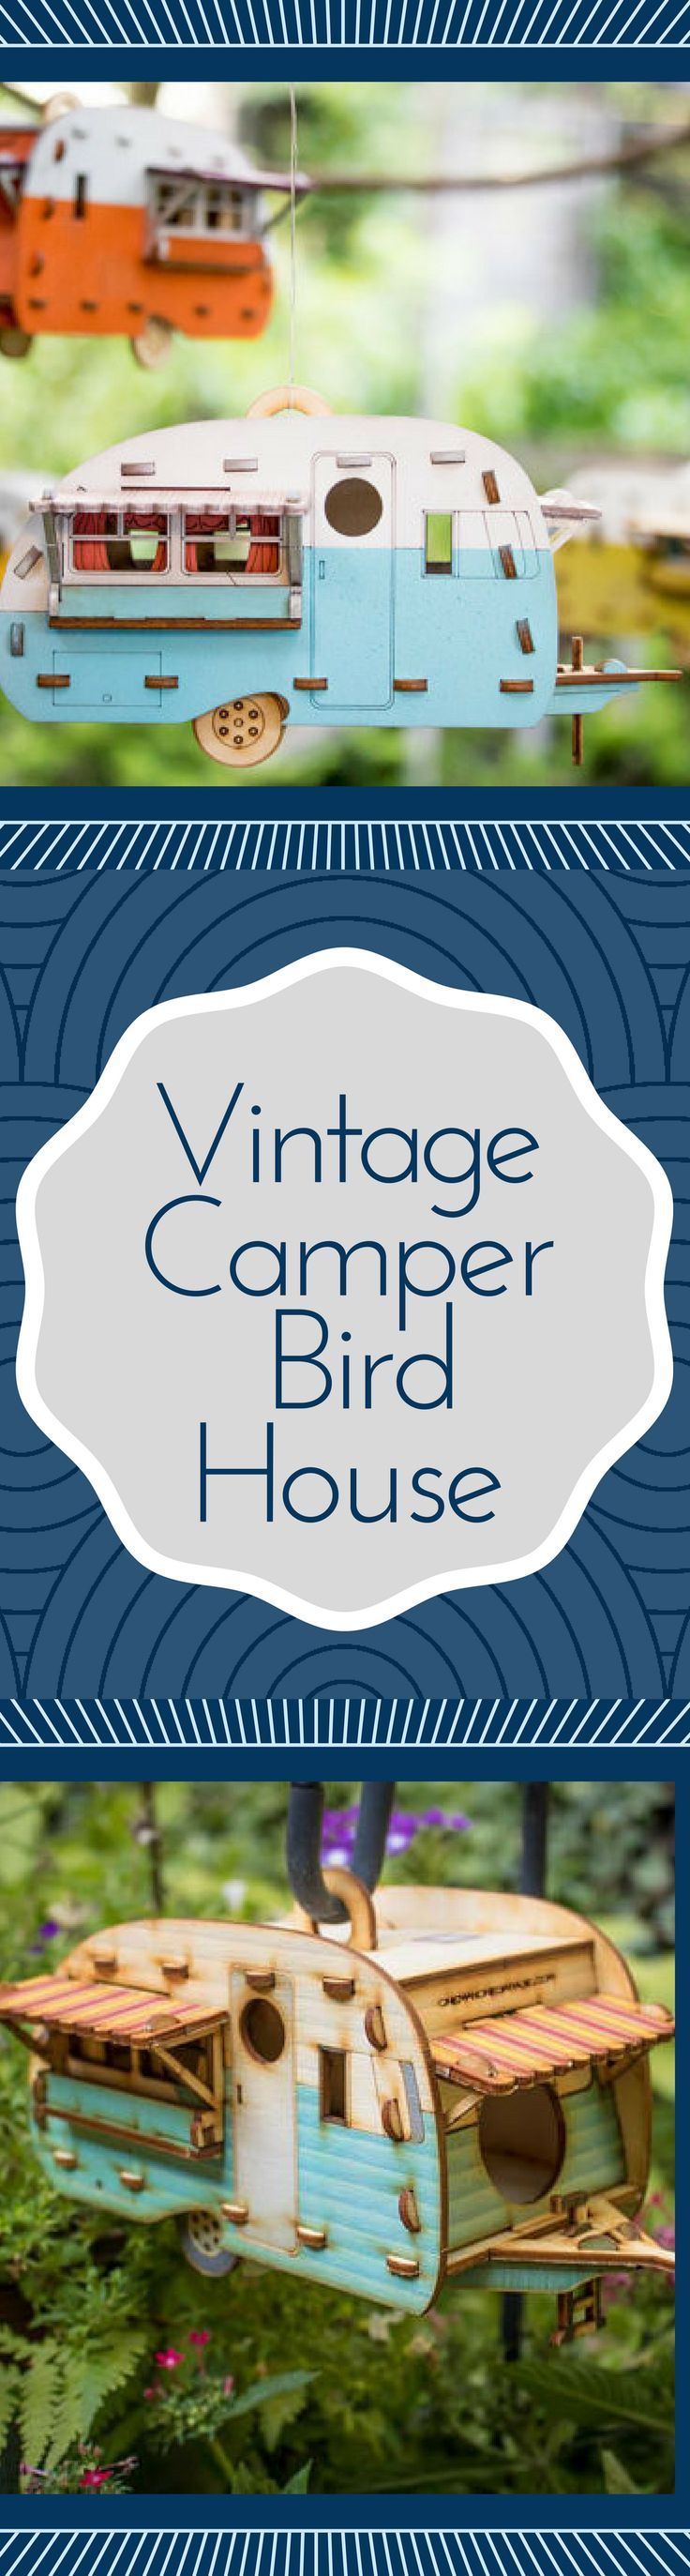 Vintage Camper Bird House. Scale model playset you can build and use! Bring back...